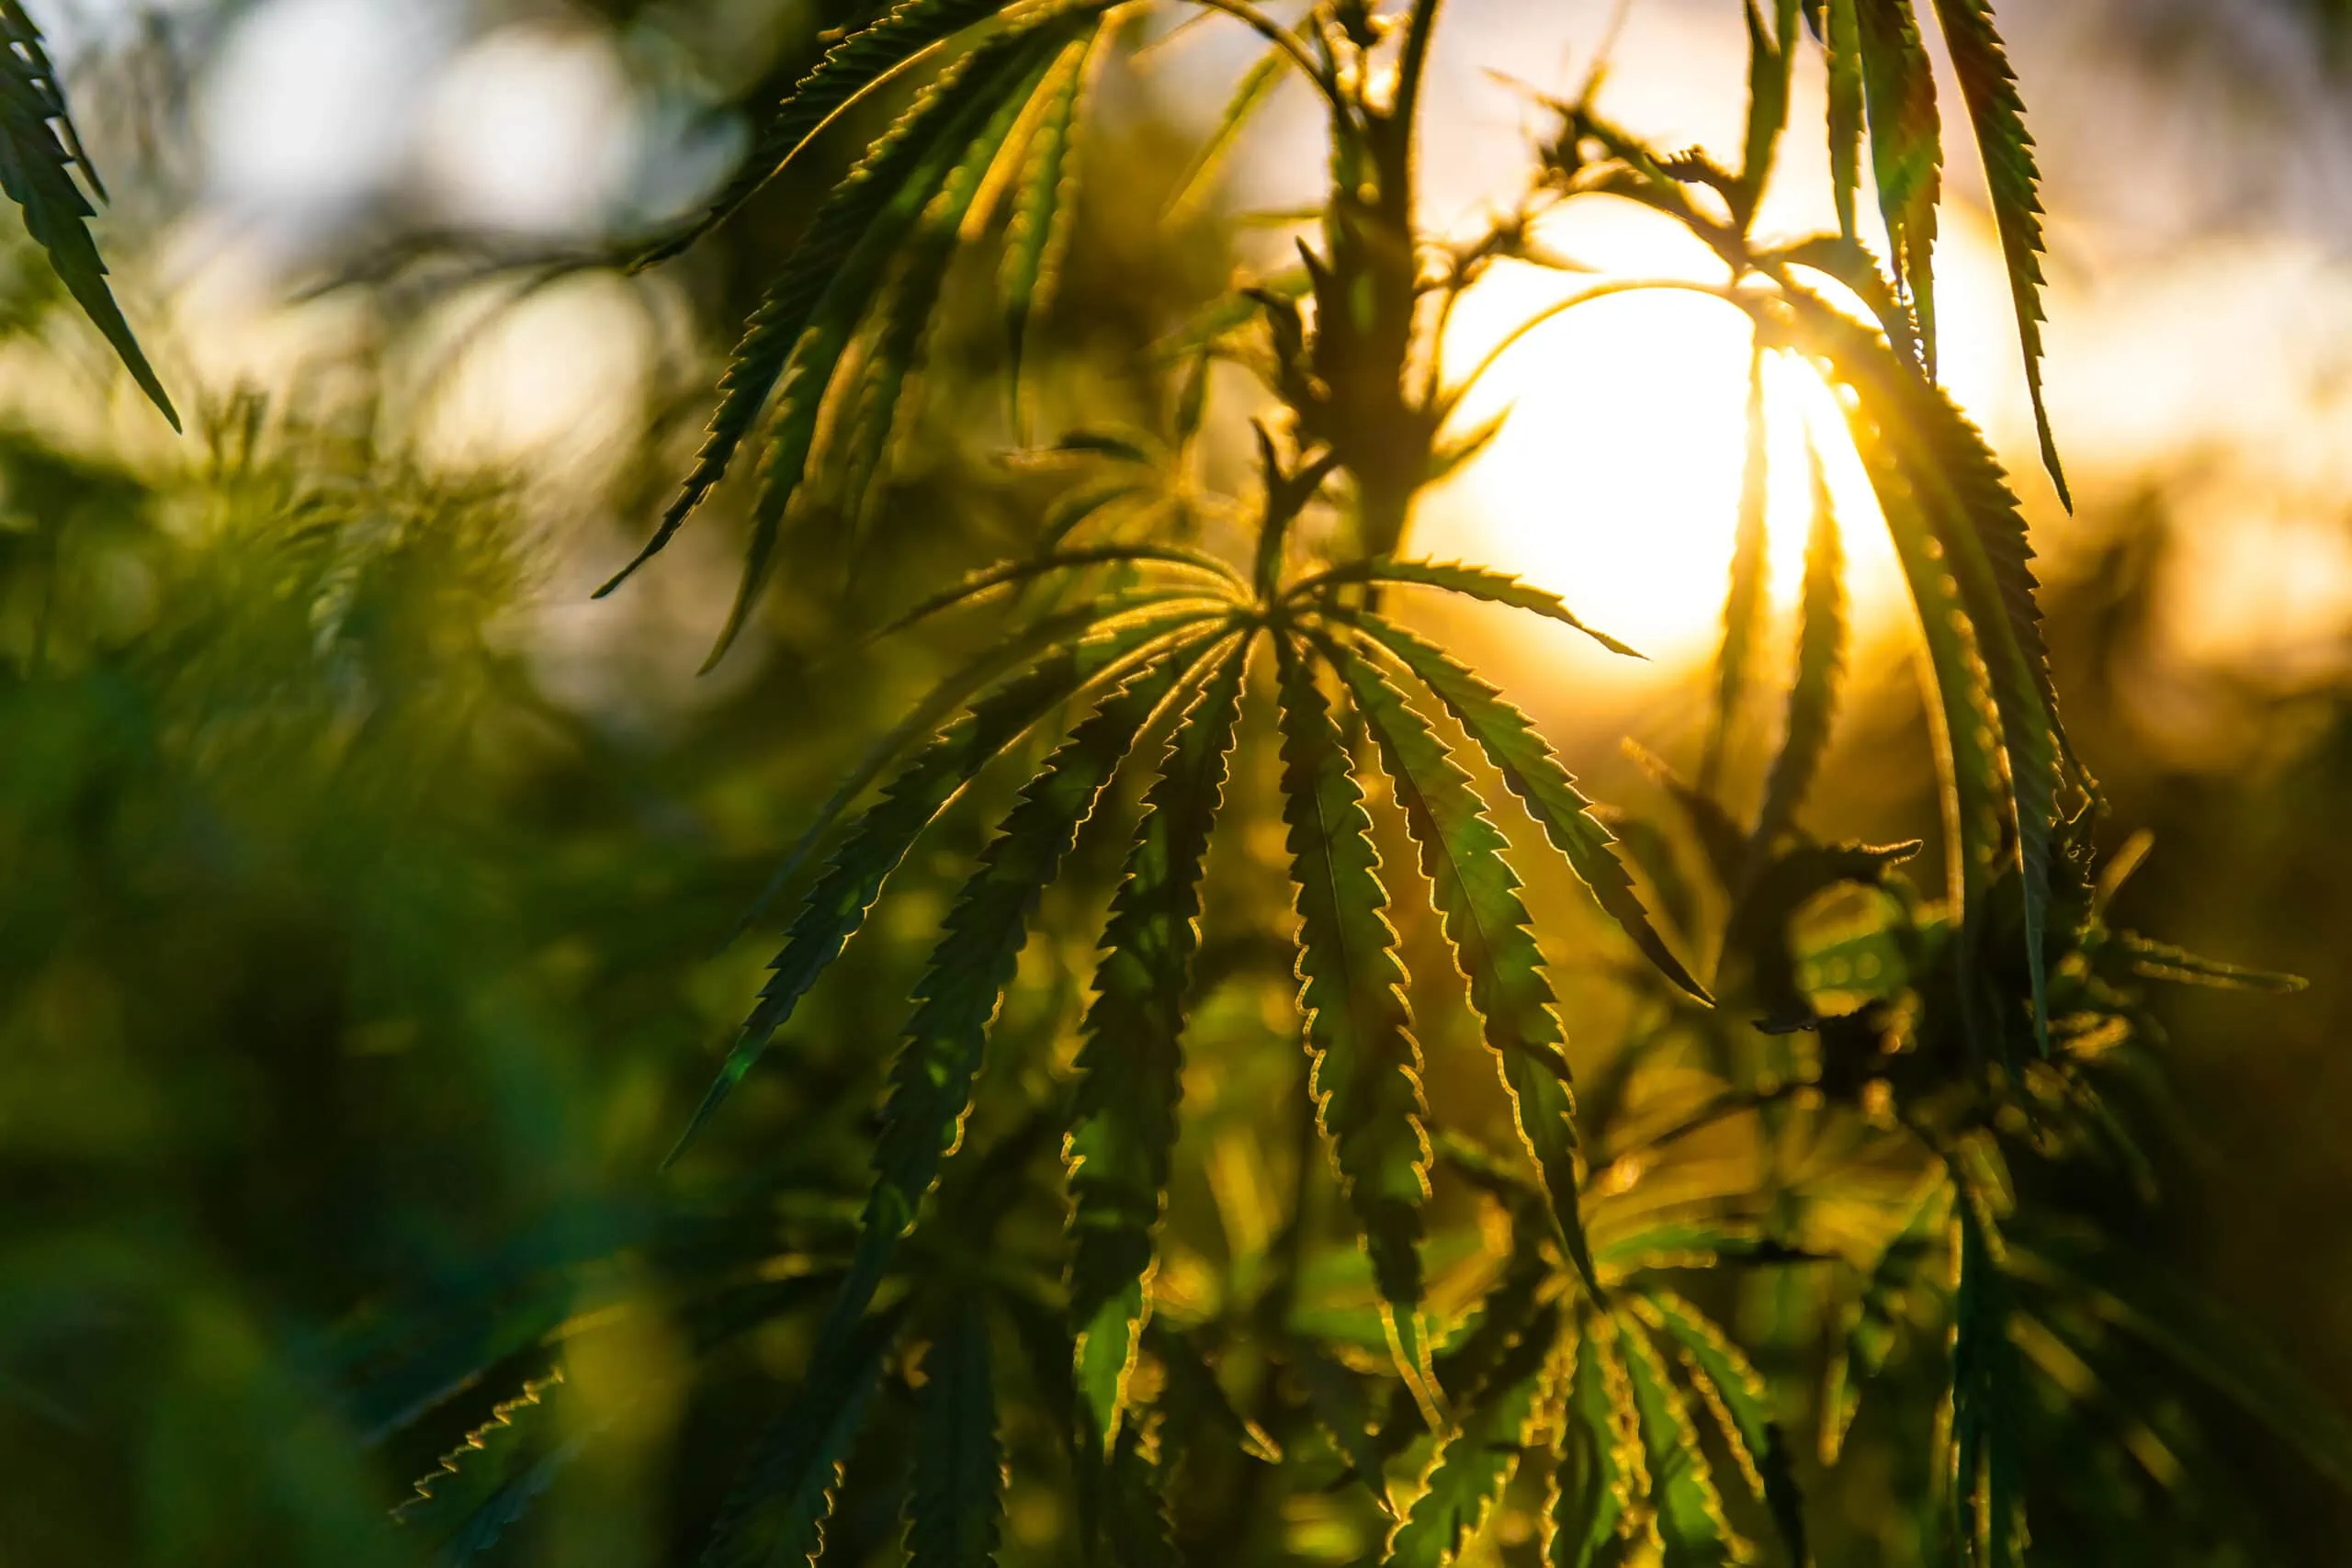 A close up of a Hemp plant with the sun setting behind it.